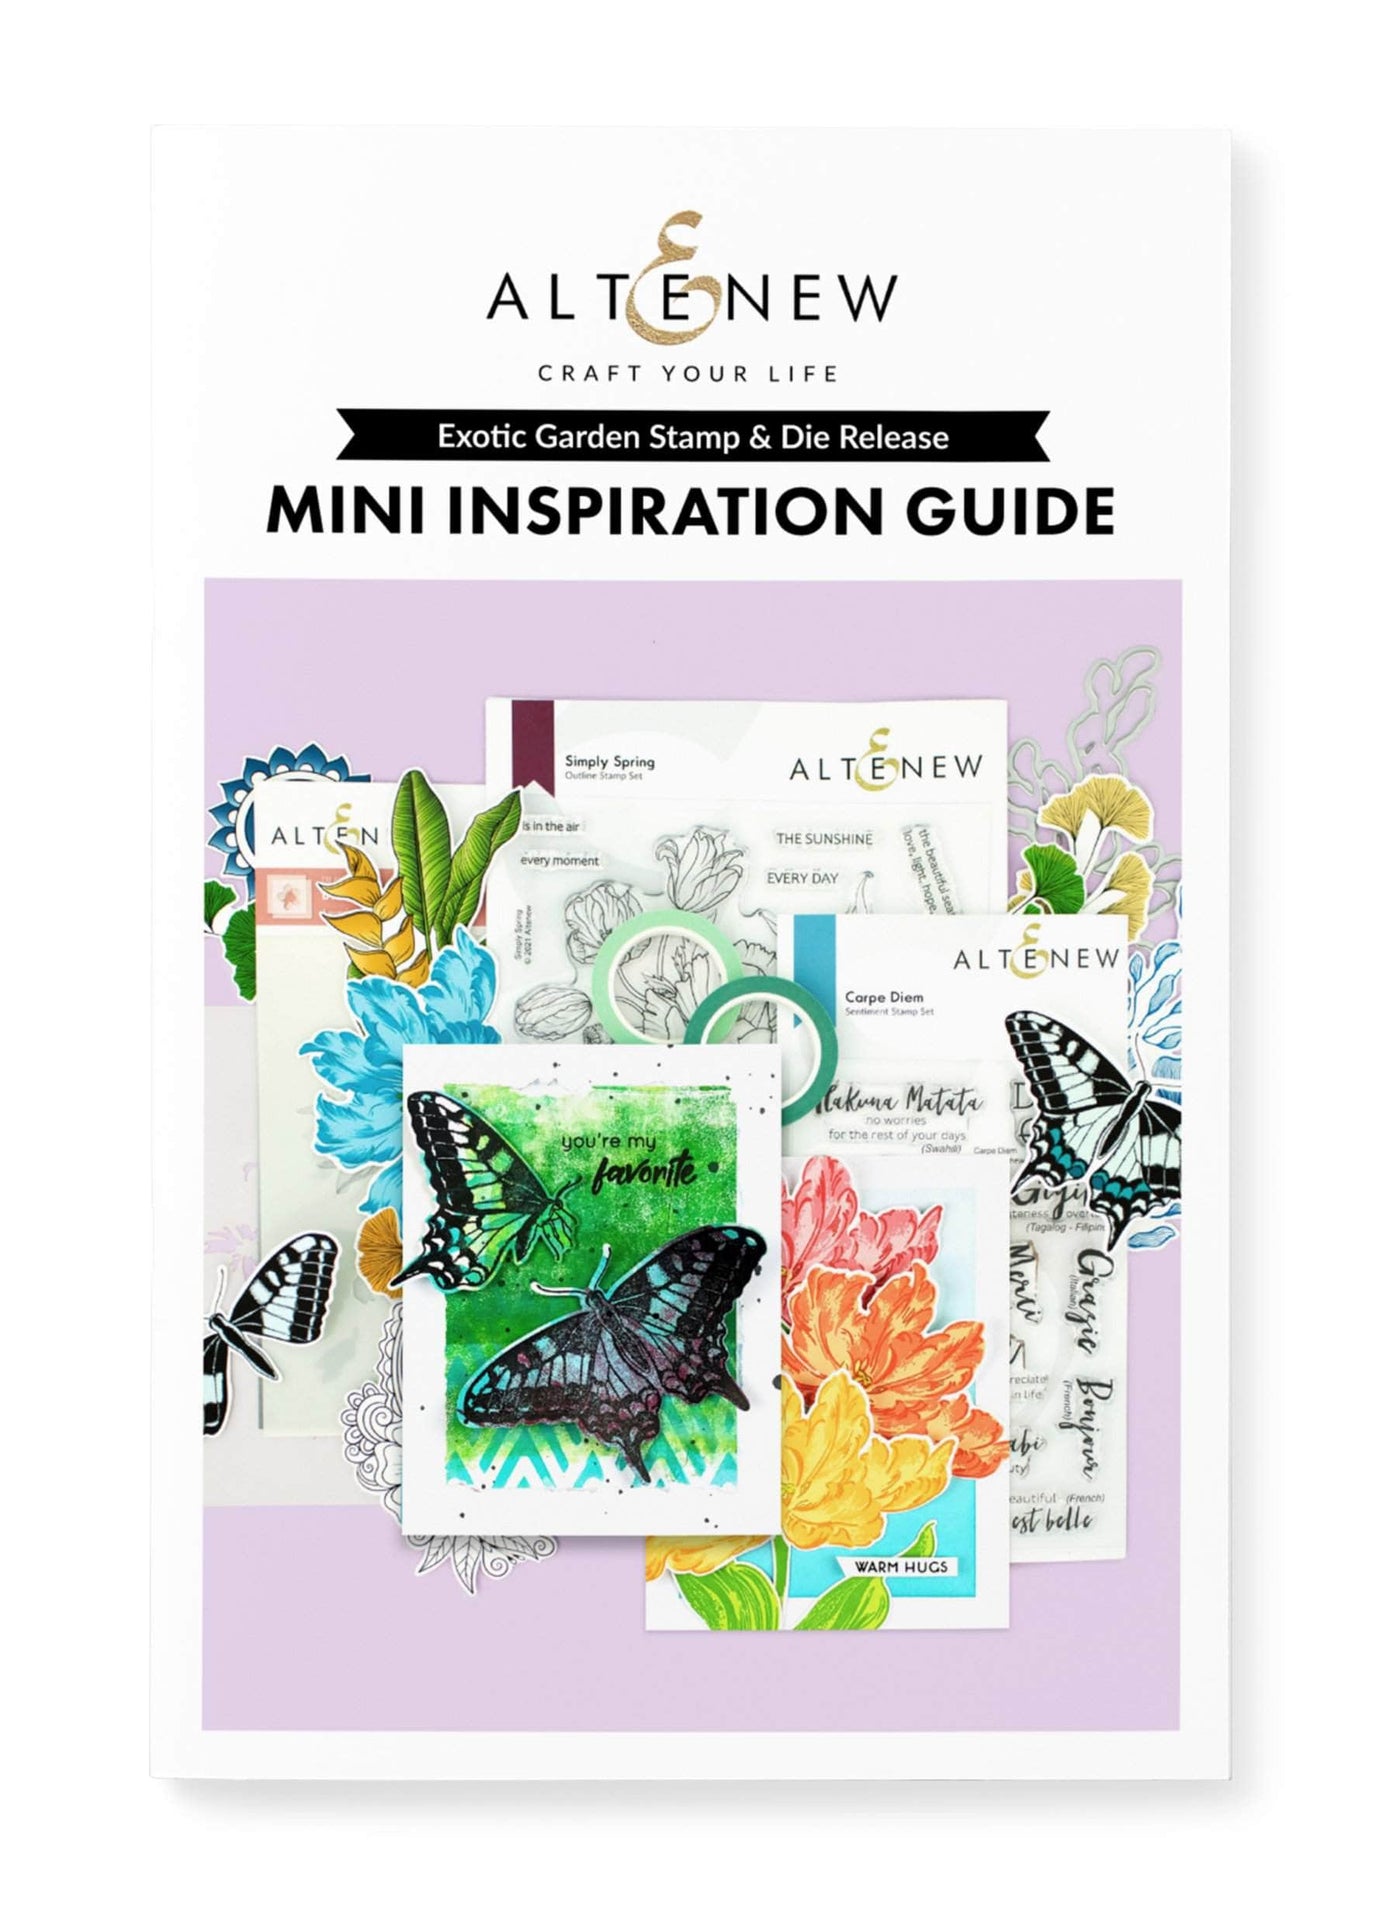 Printed Media Exotic Garden Stamp & Die Release Mini Inspiration Guide